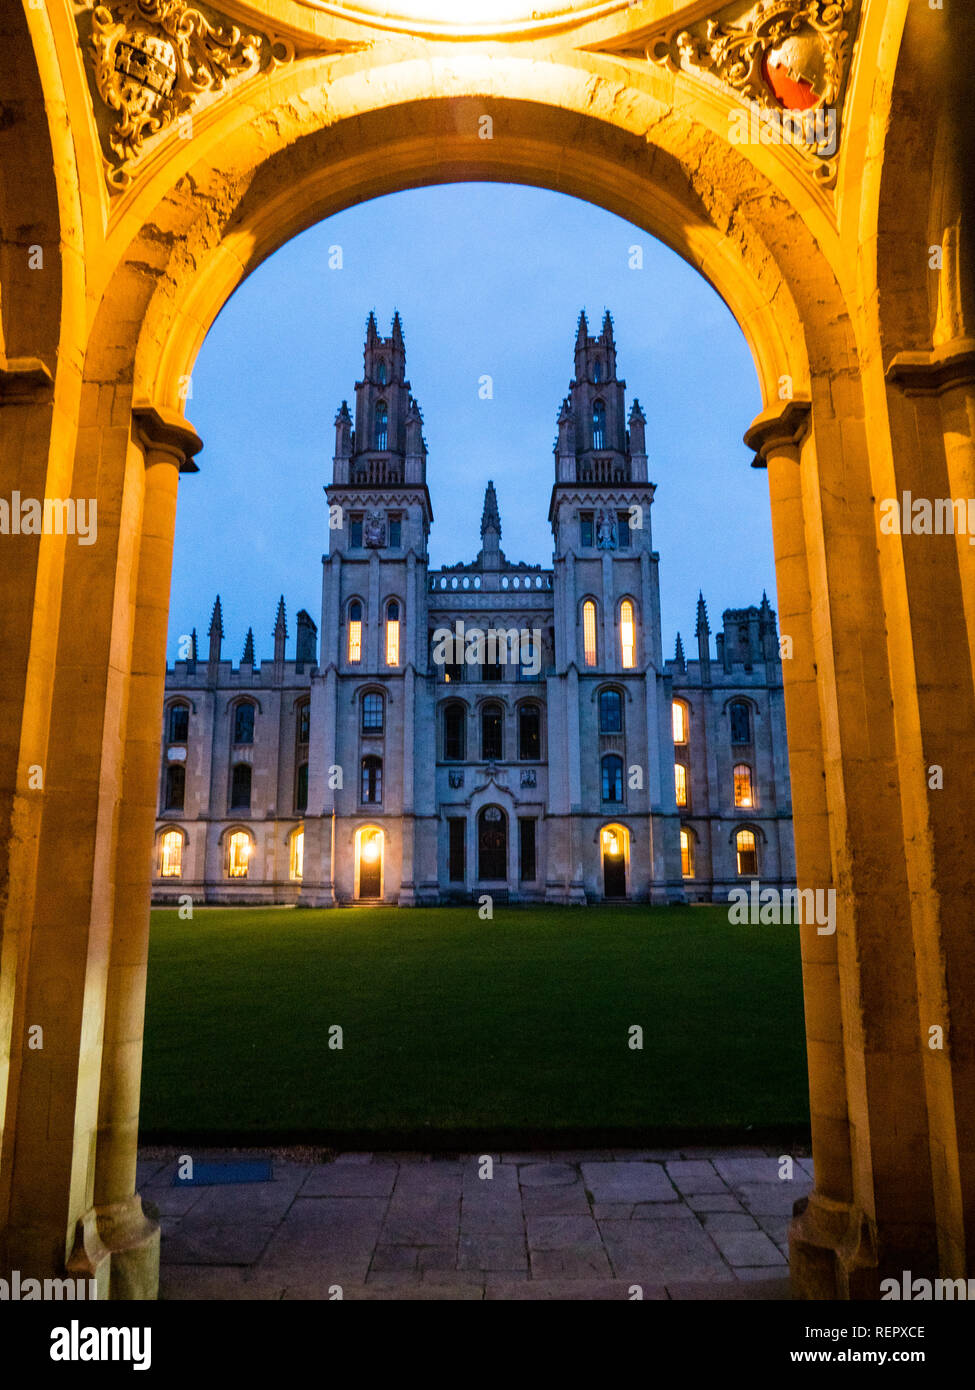 All Souls College, Oxford University, Oxford, Oxfordshire, England, UK, GB. Stock Photo